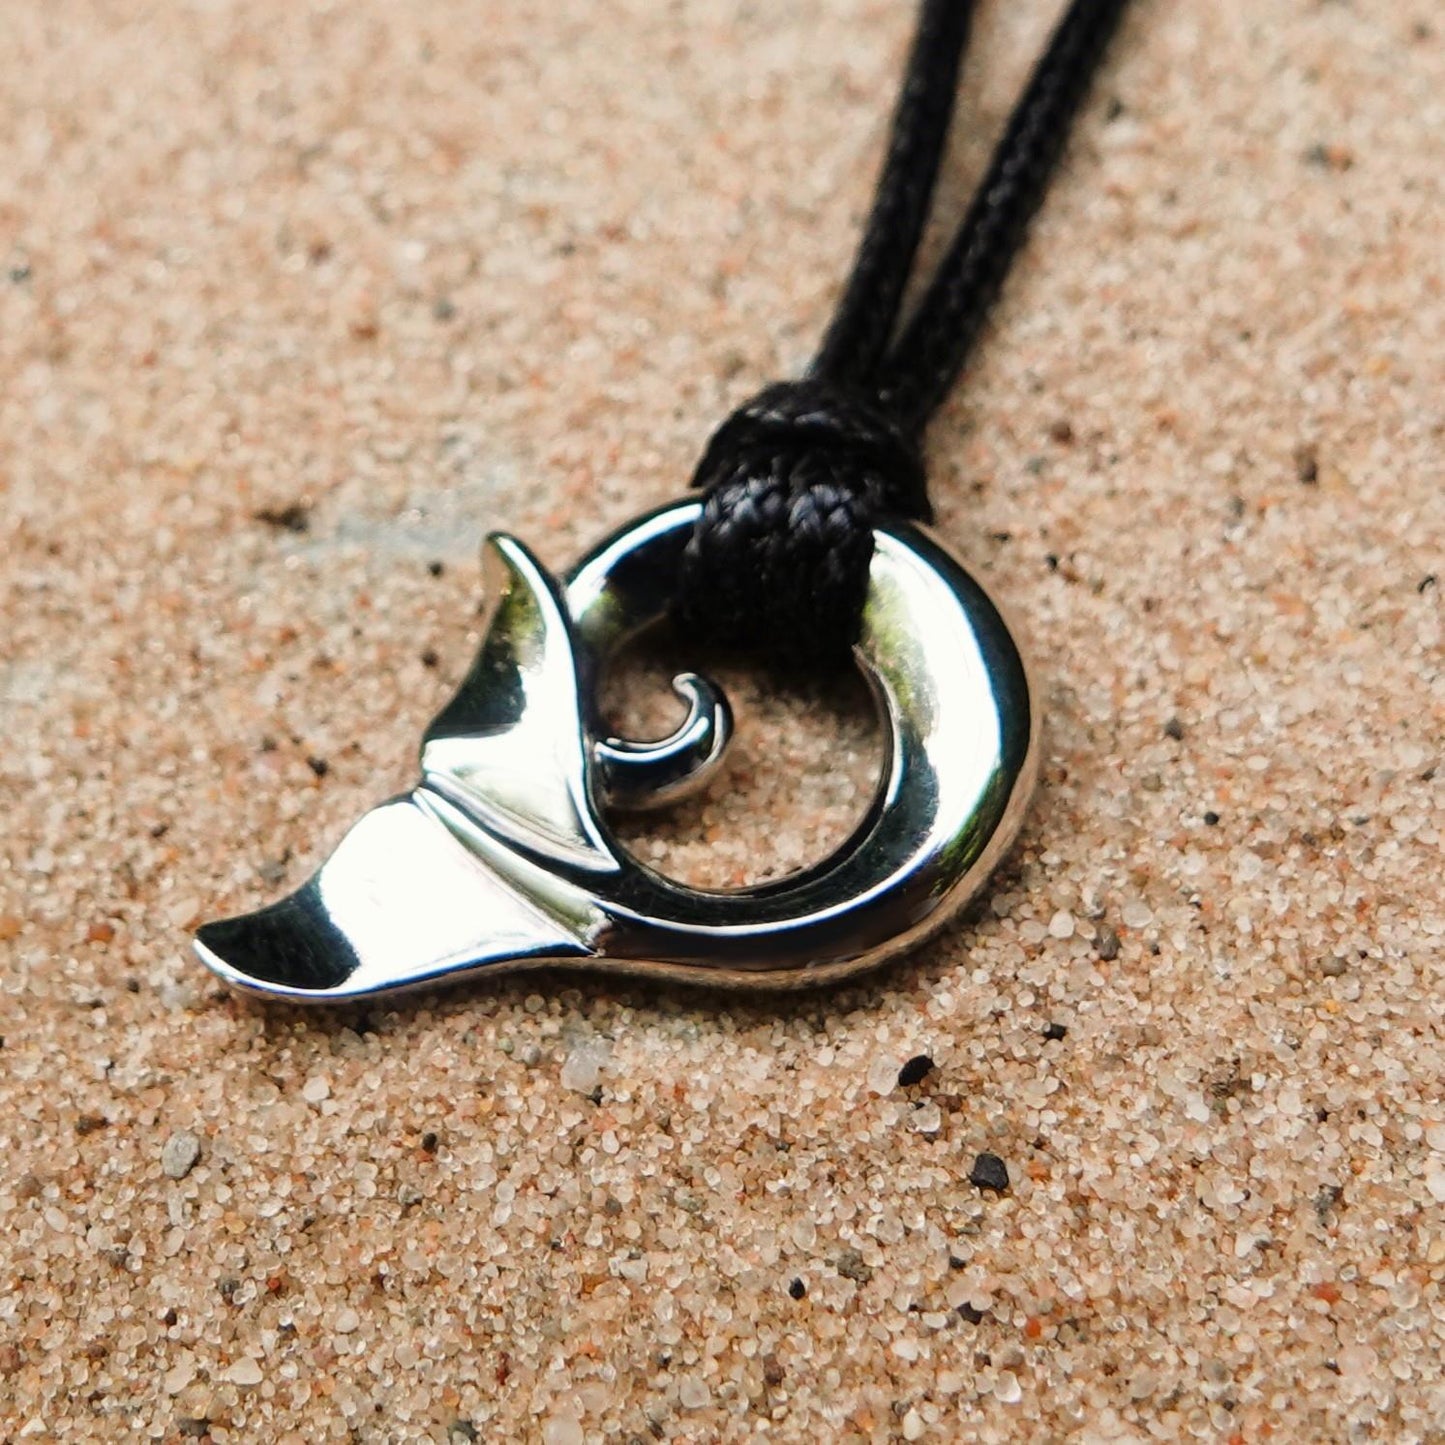 Whale tail necklace. Solid white gold whale fluke design. This piece will be handmade for you. © Adrian Ashley